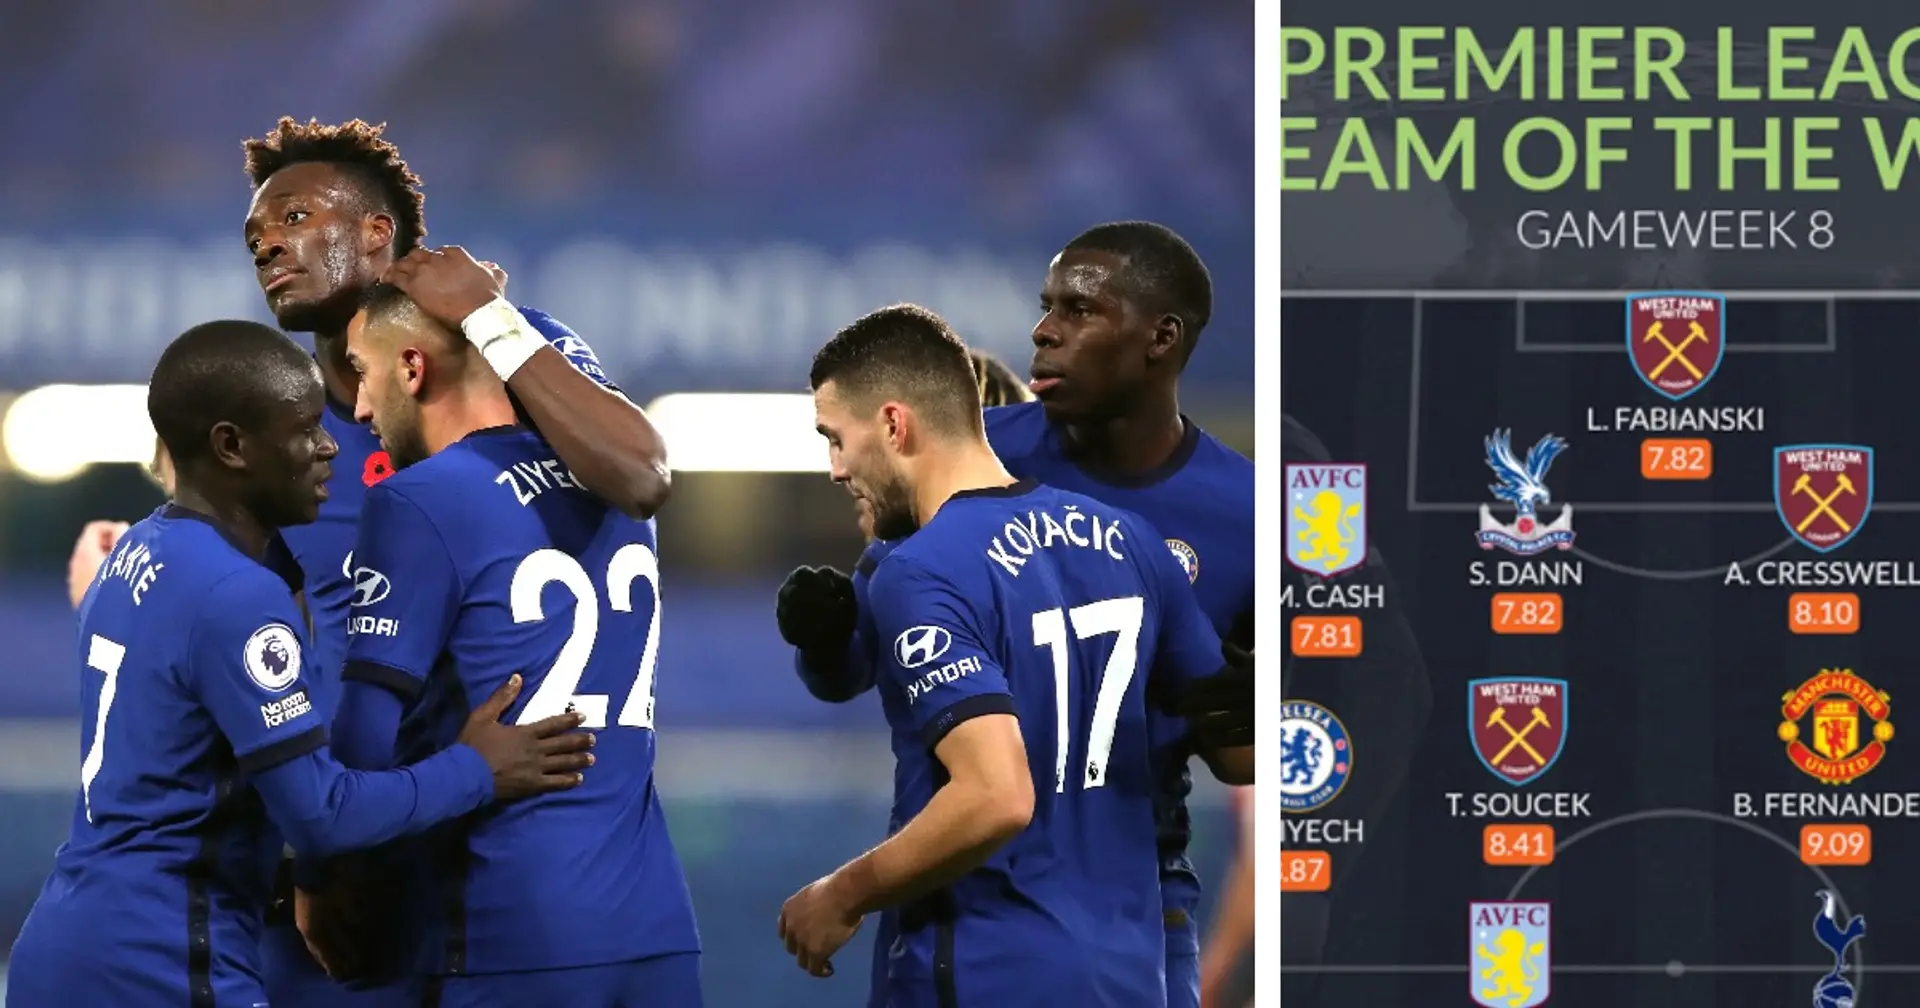 2 Chelsea stars make it to WhoScored's PL Team of the Week